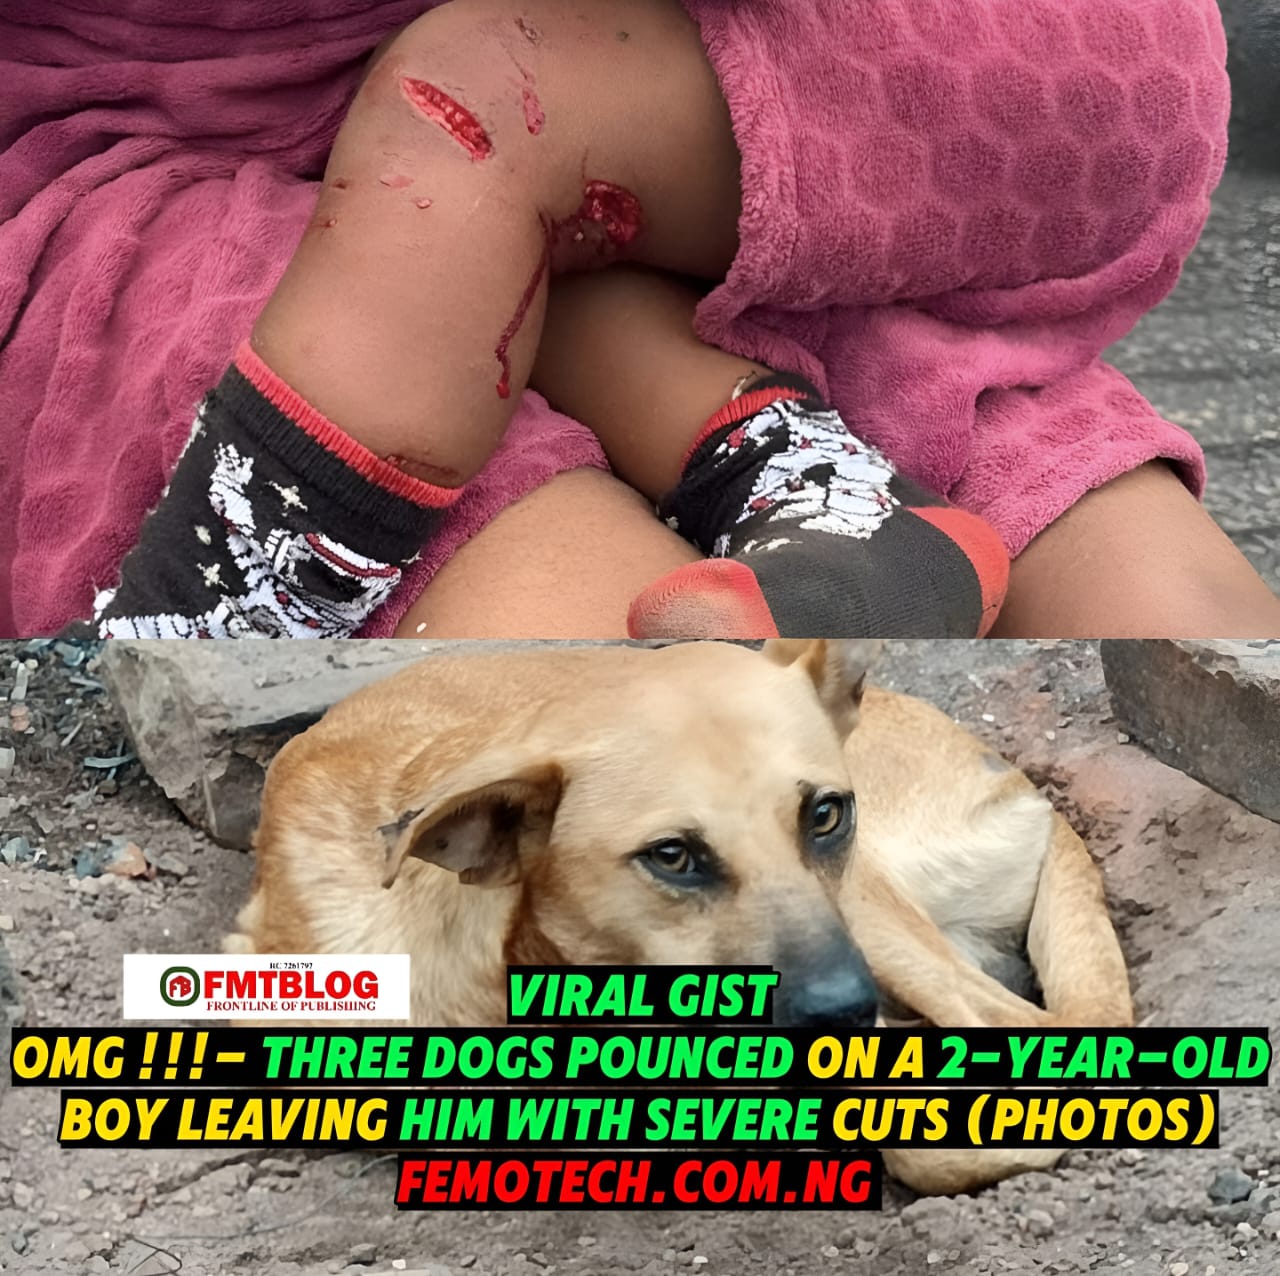 OMG!!!- Three Dogs Pounced On A 2-Year-Old Boy Leaving Him With Severe Cuts (PHOTOS)